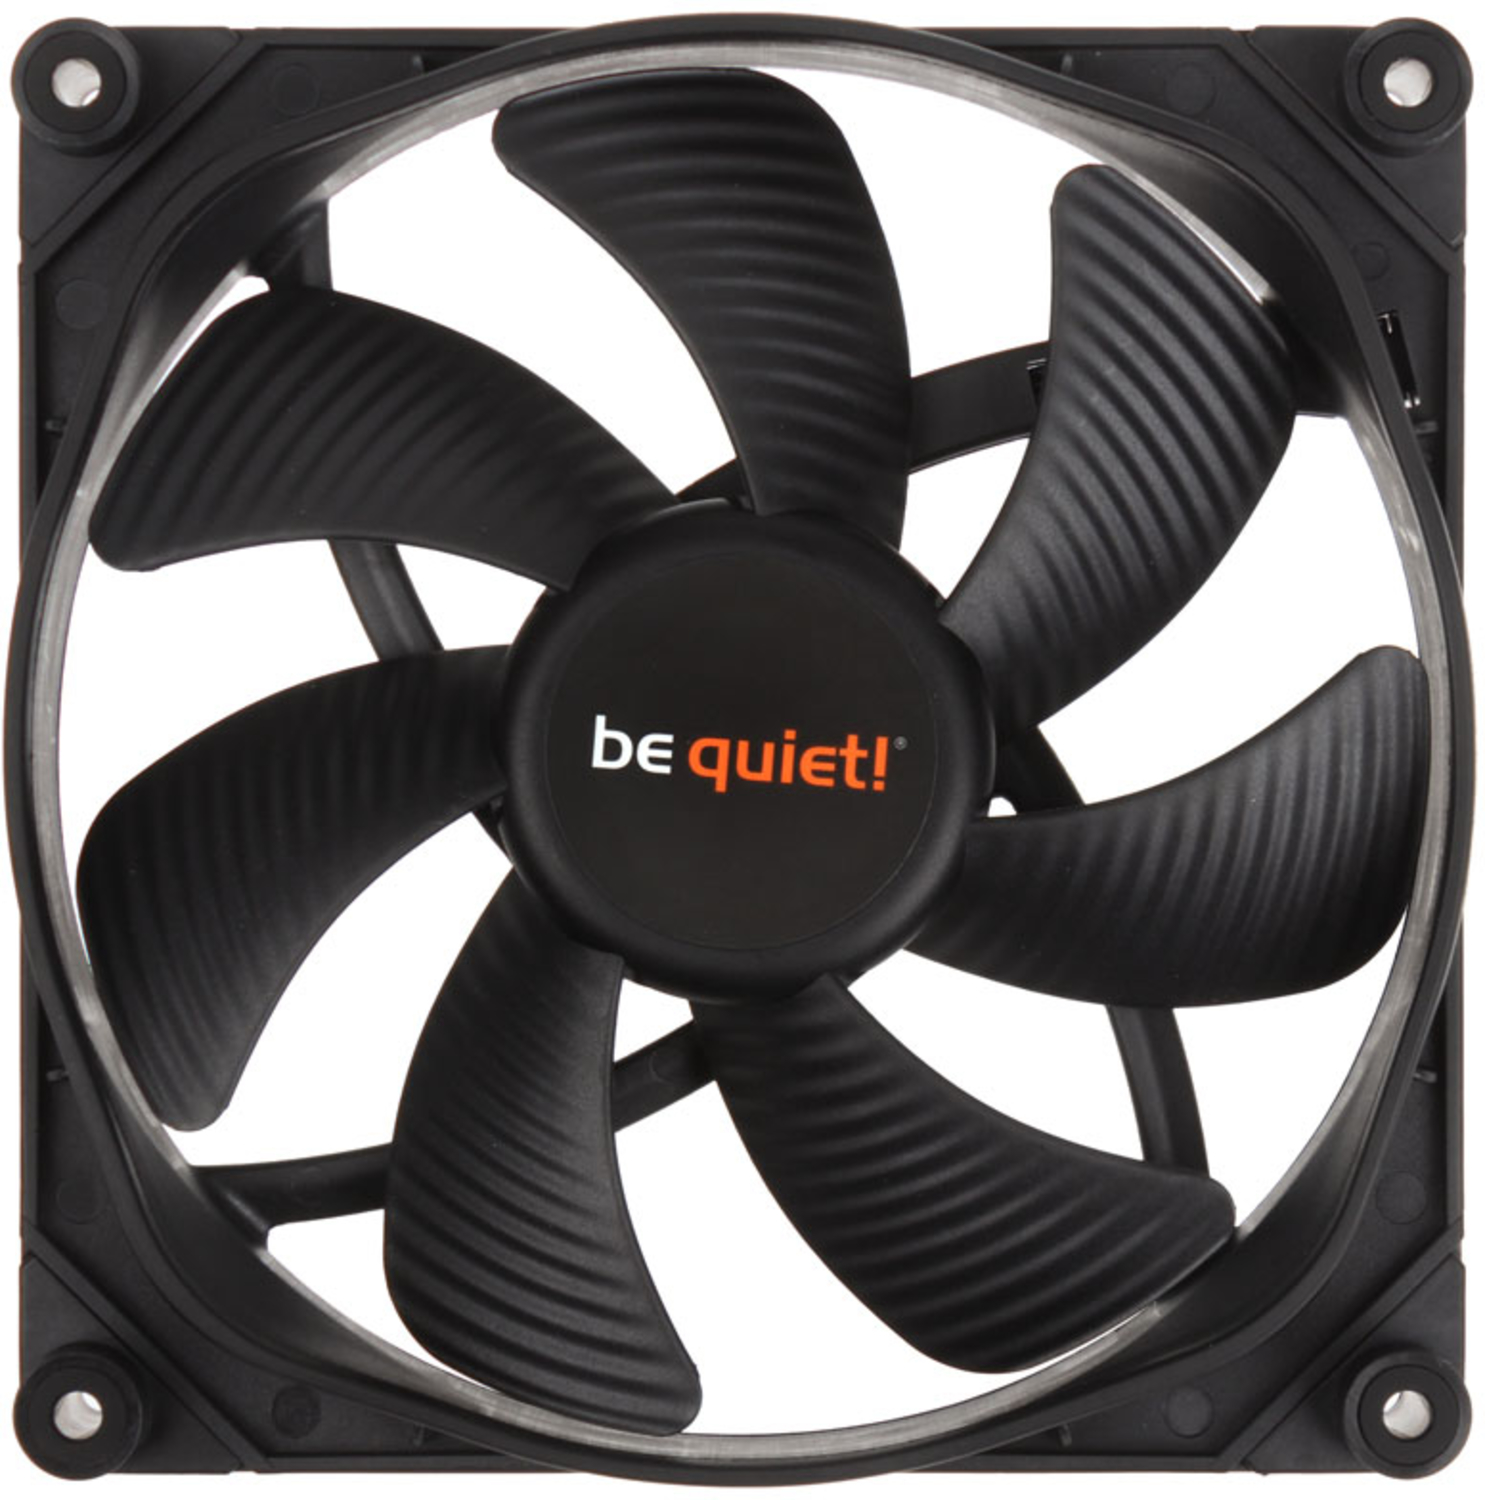 be quiet! - Ventoinha be quiet! Silent Wings 3 PWM 140mm